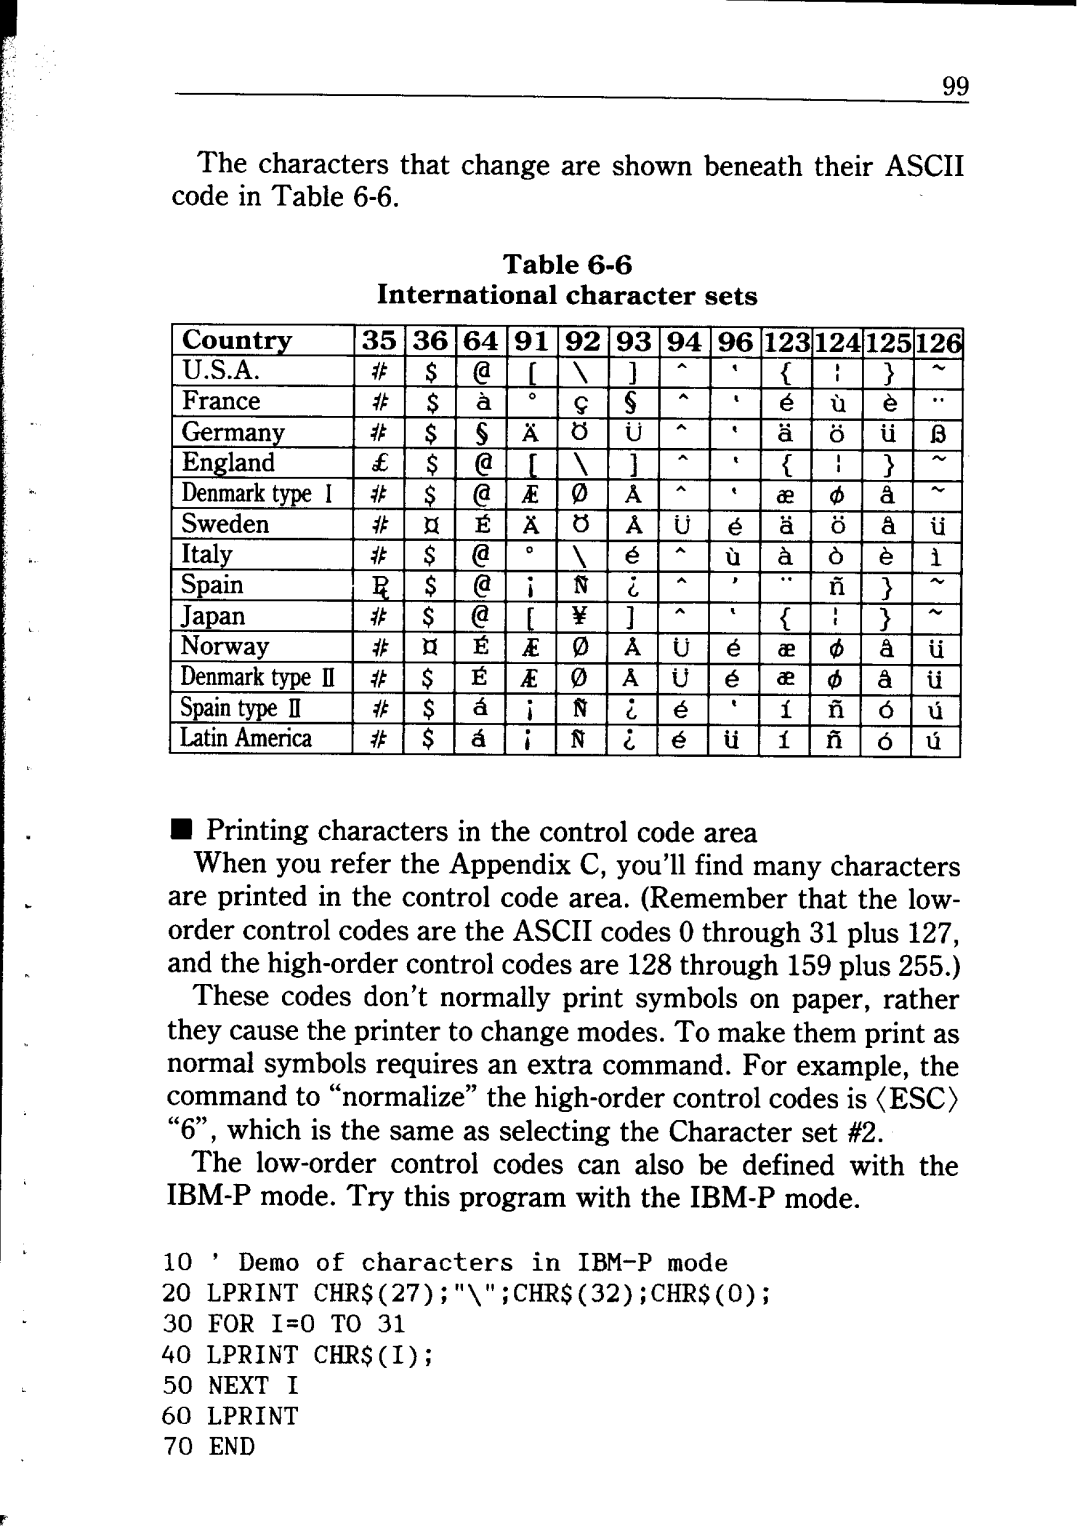 Star Micronics NB24-10/15 user manual The characters that change are shown beneath their ASCII code in Table 